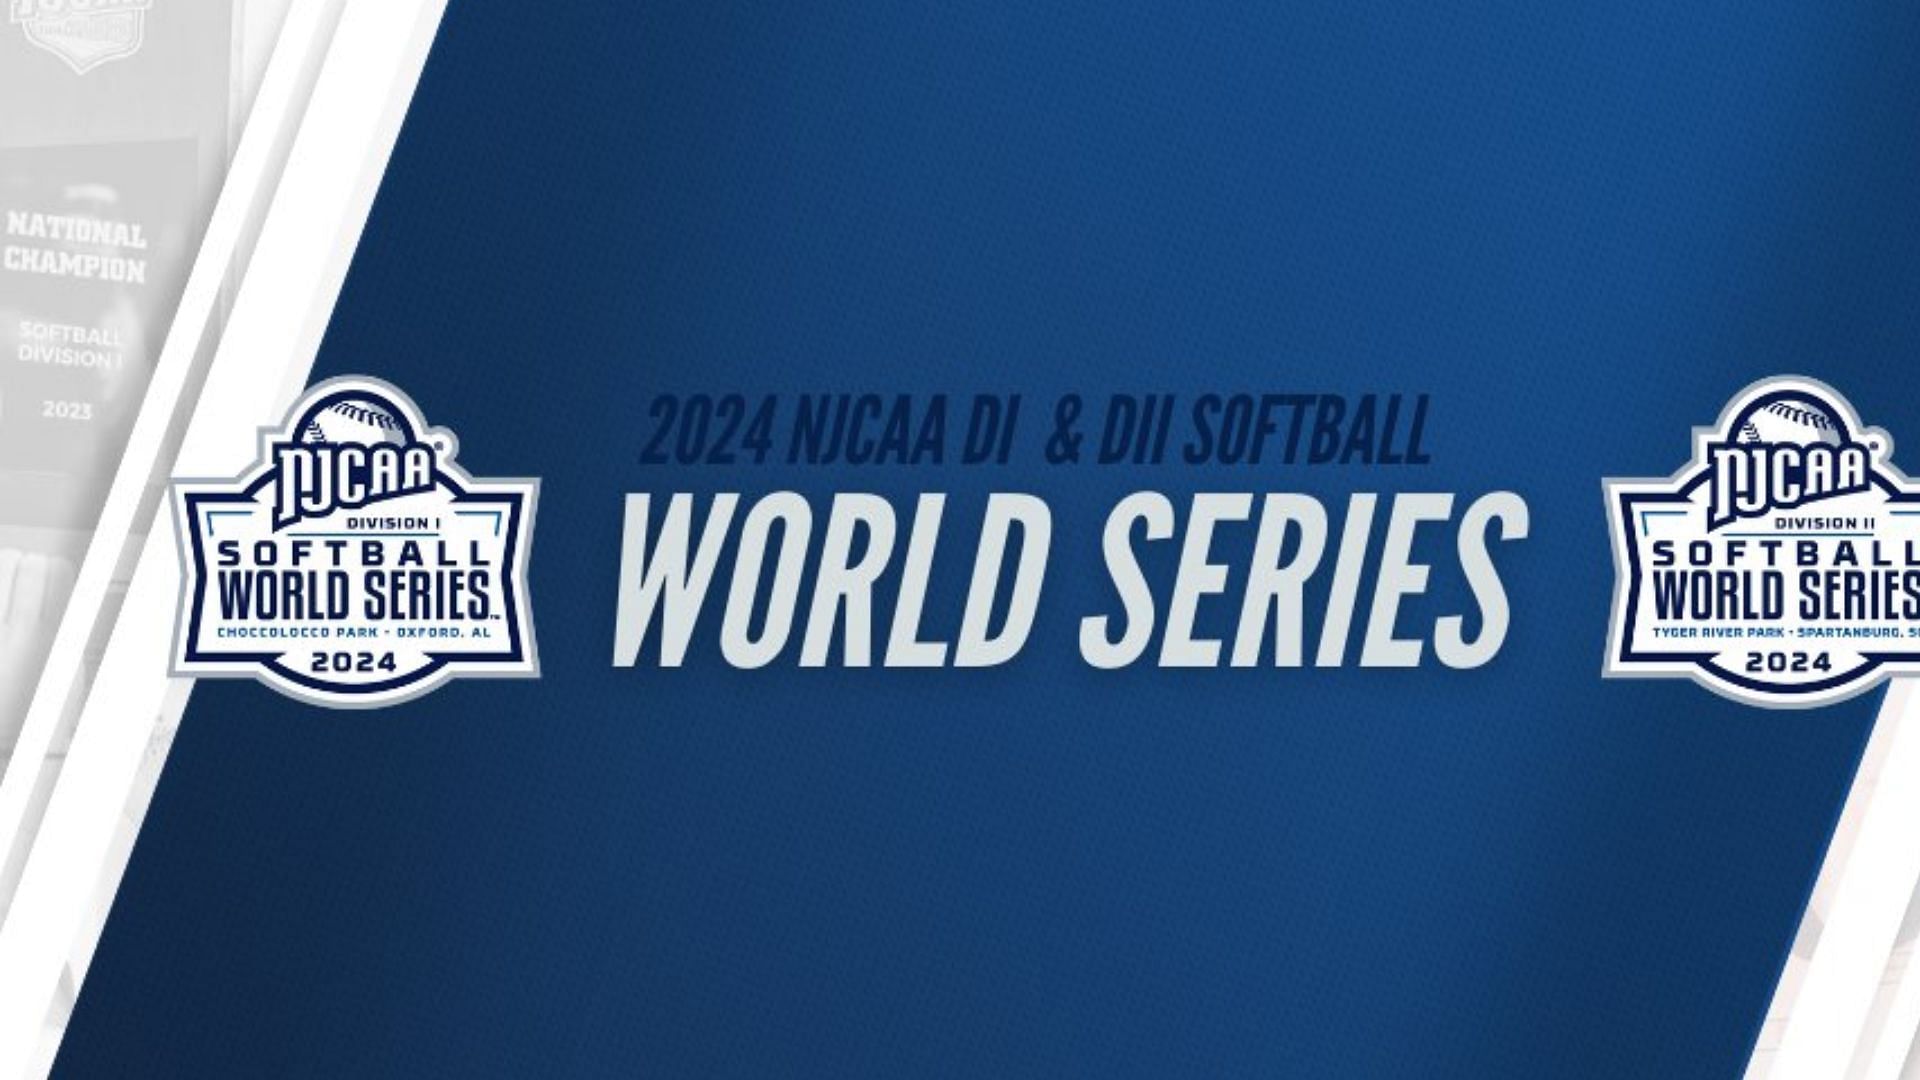 NJCAA softball World Series 2024: Schedule, format, how to watch, tickets and more